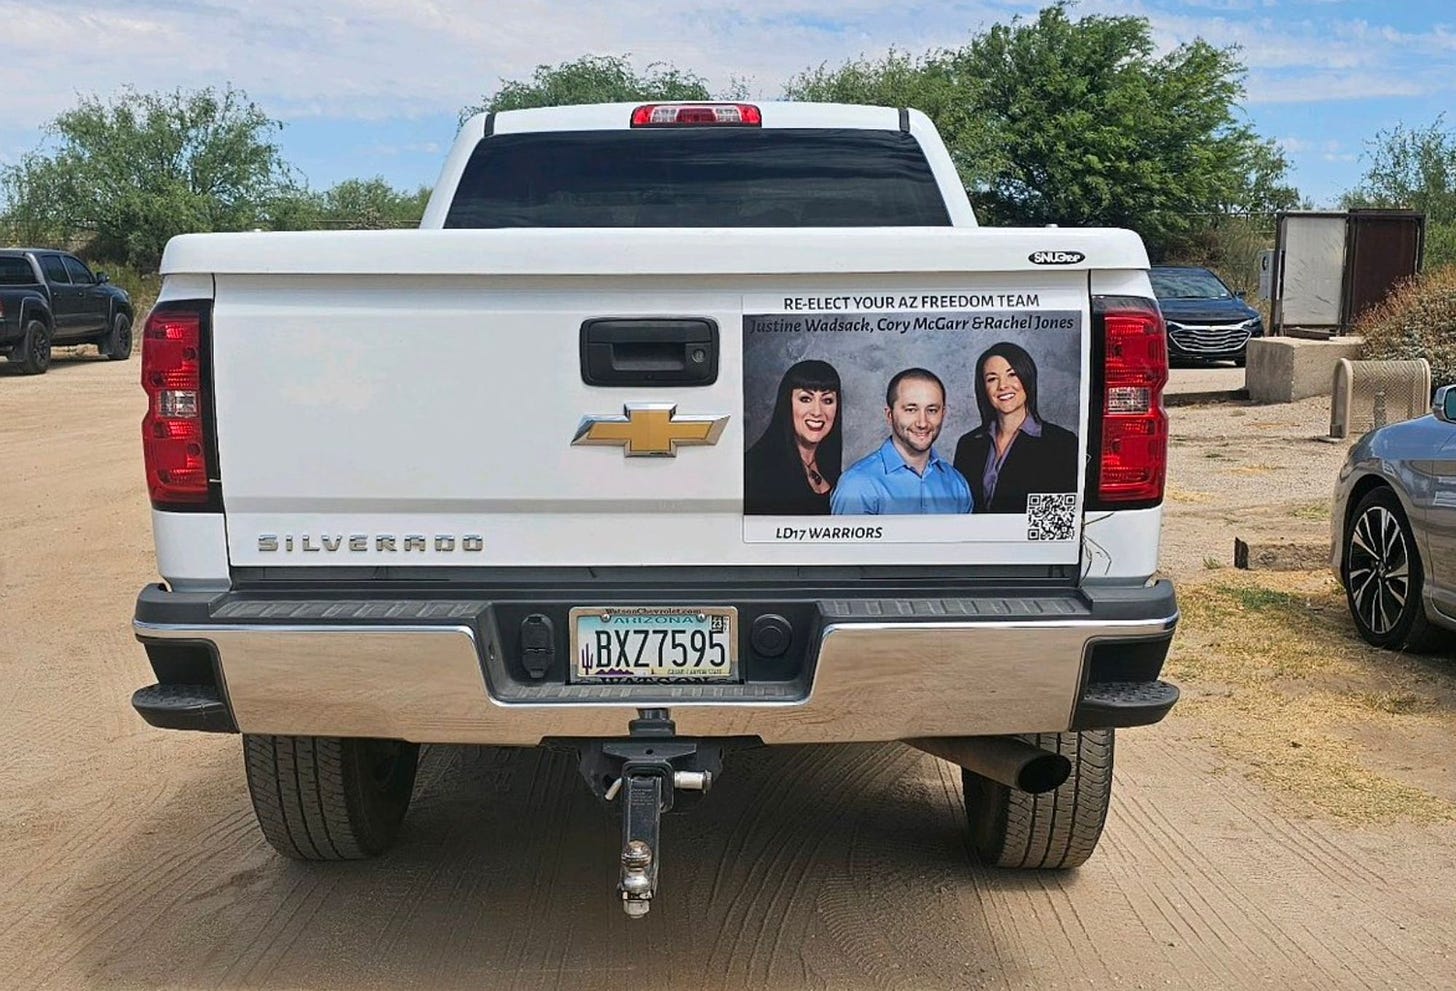 A white Chevy Silverado truck parked in a dirt parking lot. A large sticker taking up half their tailgate is an image of Justine Wadsack, Cory McGarr, and Rachel Jones, aka the “AZ Freedom Team.” The bottom text reads “LD17 warriors.” AZ plates read BXZ7595.